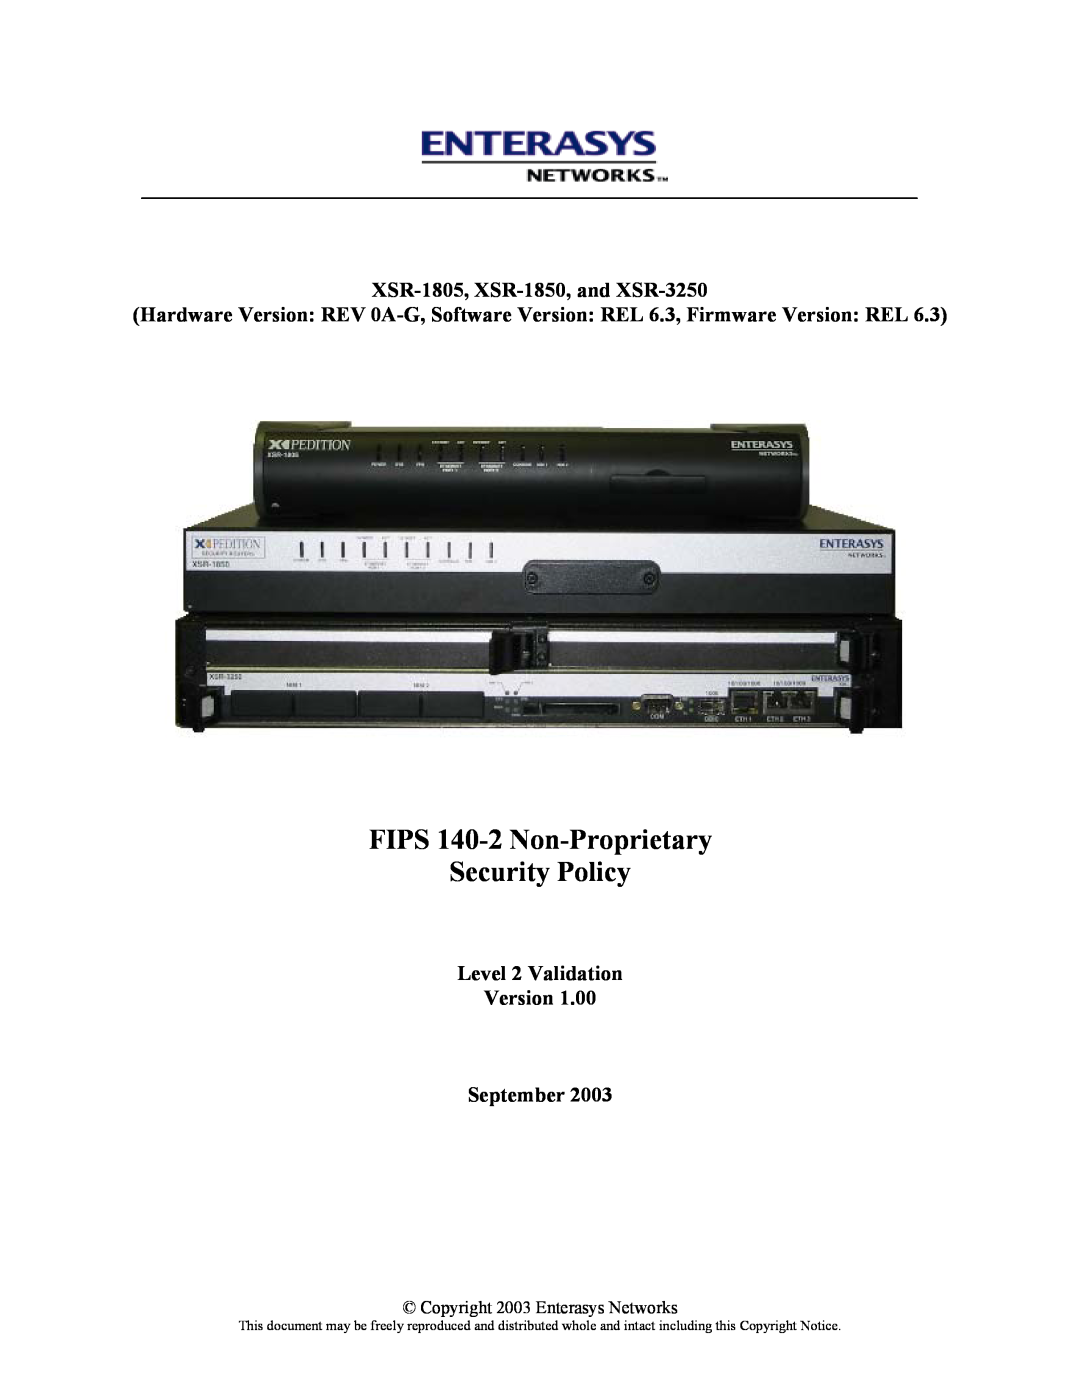 Enterasys Networks manual FIPS 140-2 Non-Proprietary Security Policy, XSR-1805, XSR-1850, and XSR-3250 